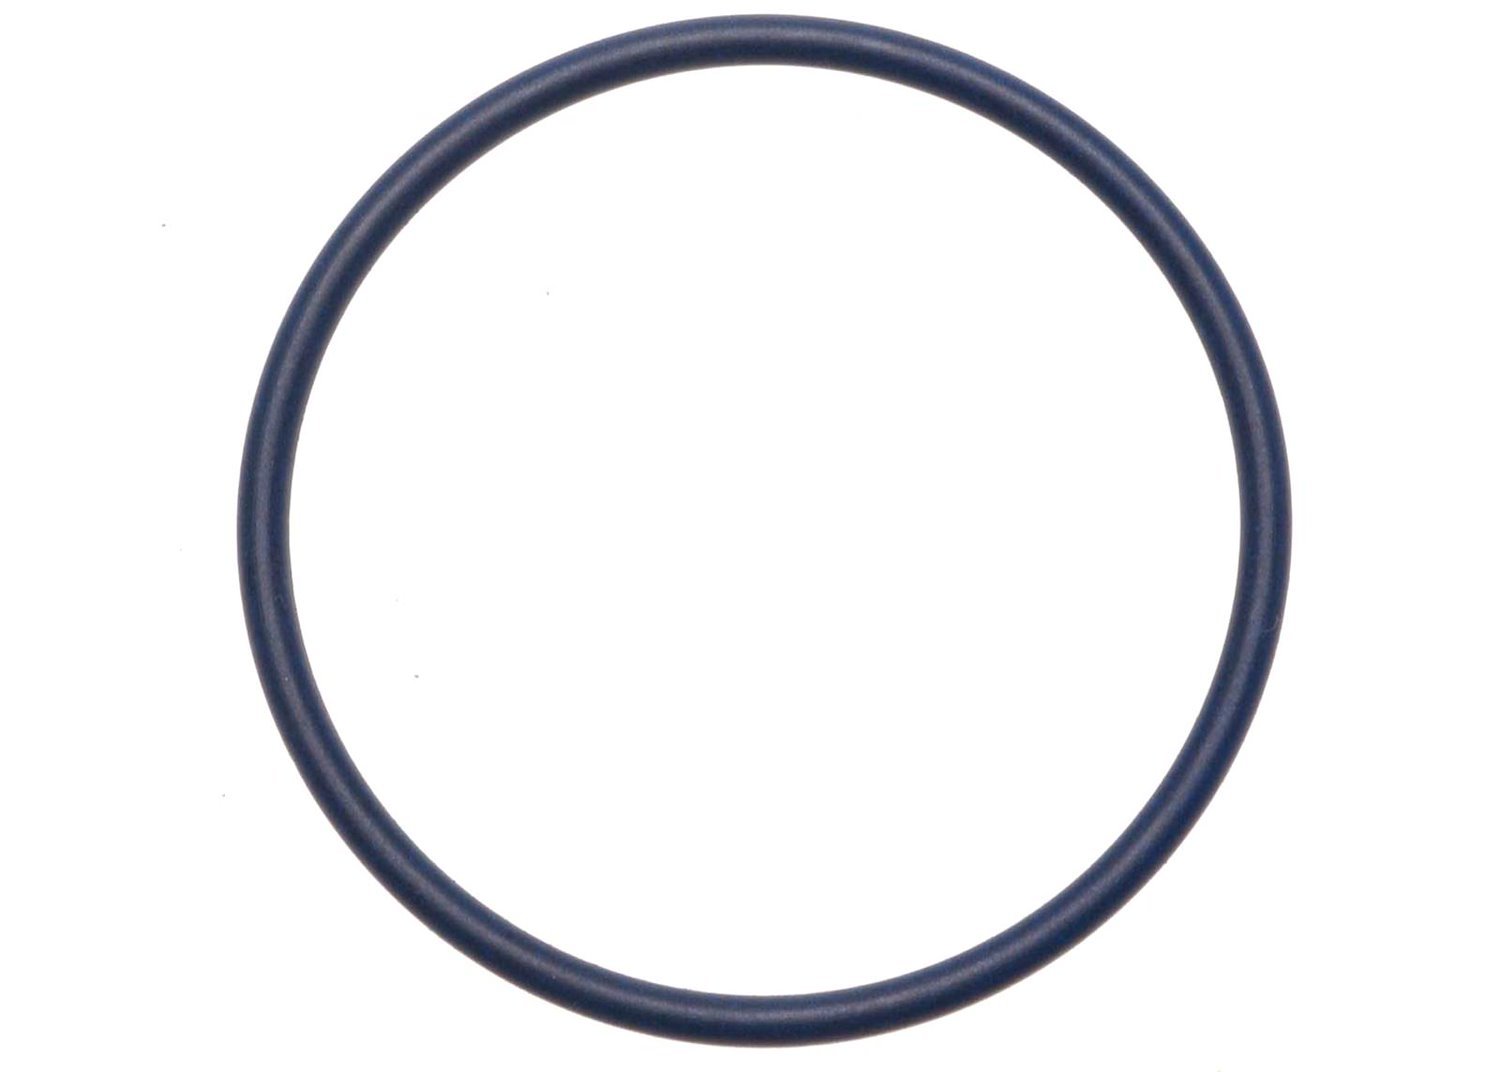 Transmission Speed Sensor Seal for Select 1982-1998 Buick,